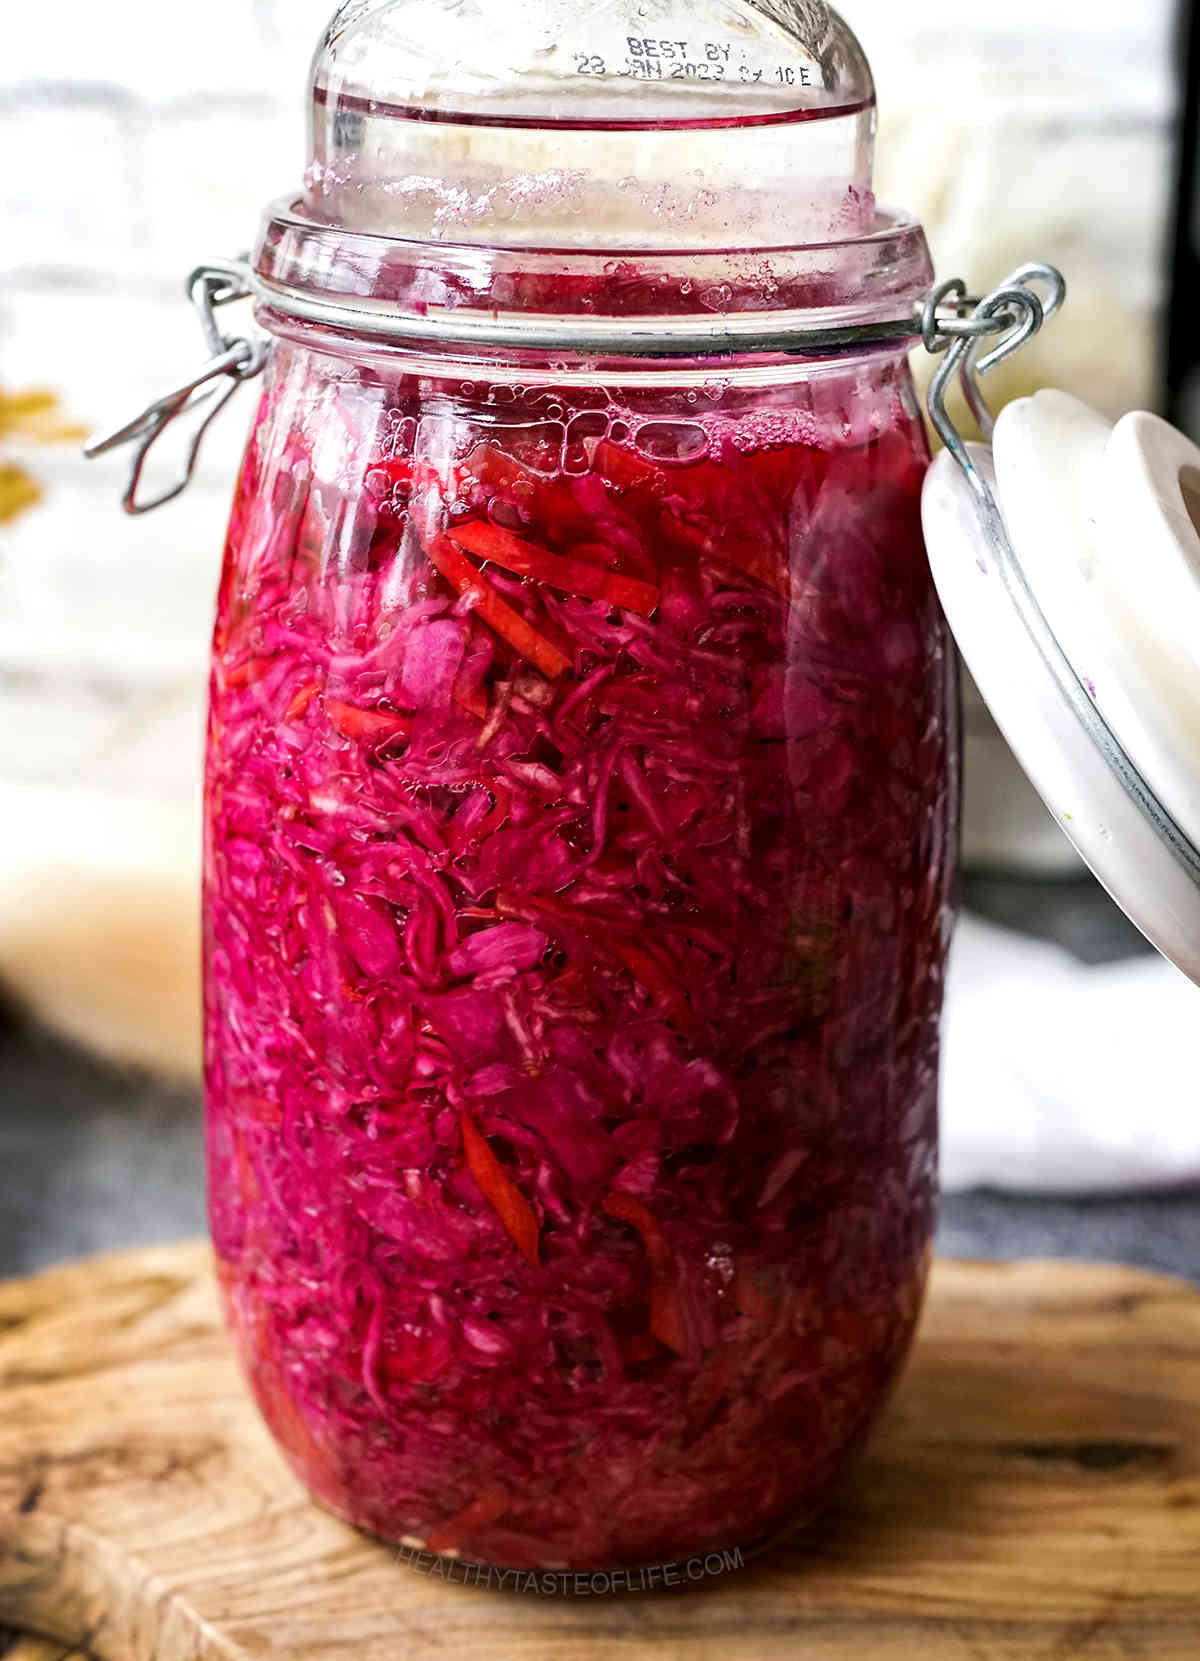 lacto-fermented red cabbage and carrot in a jar